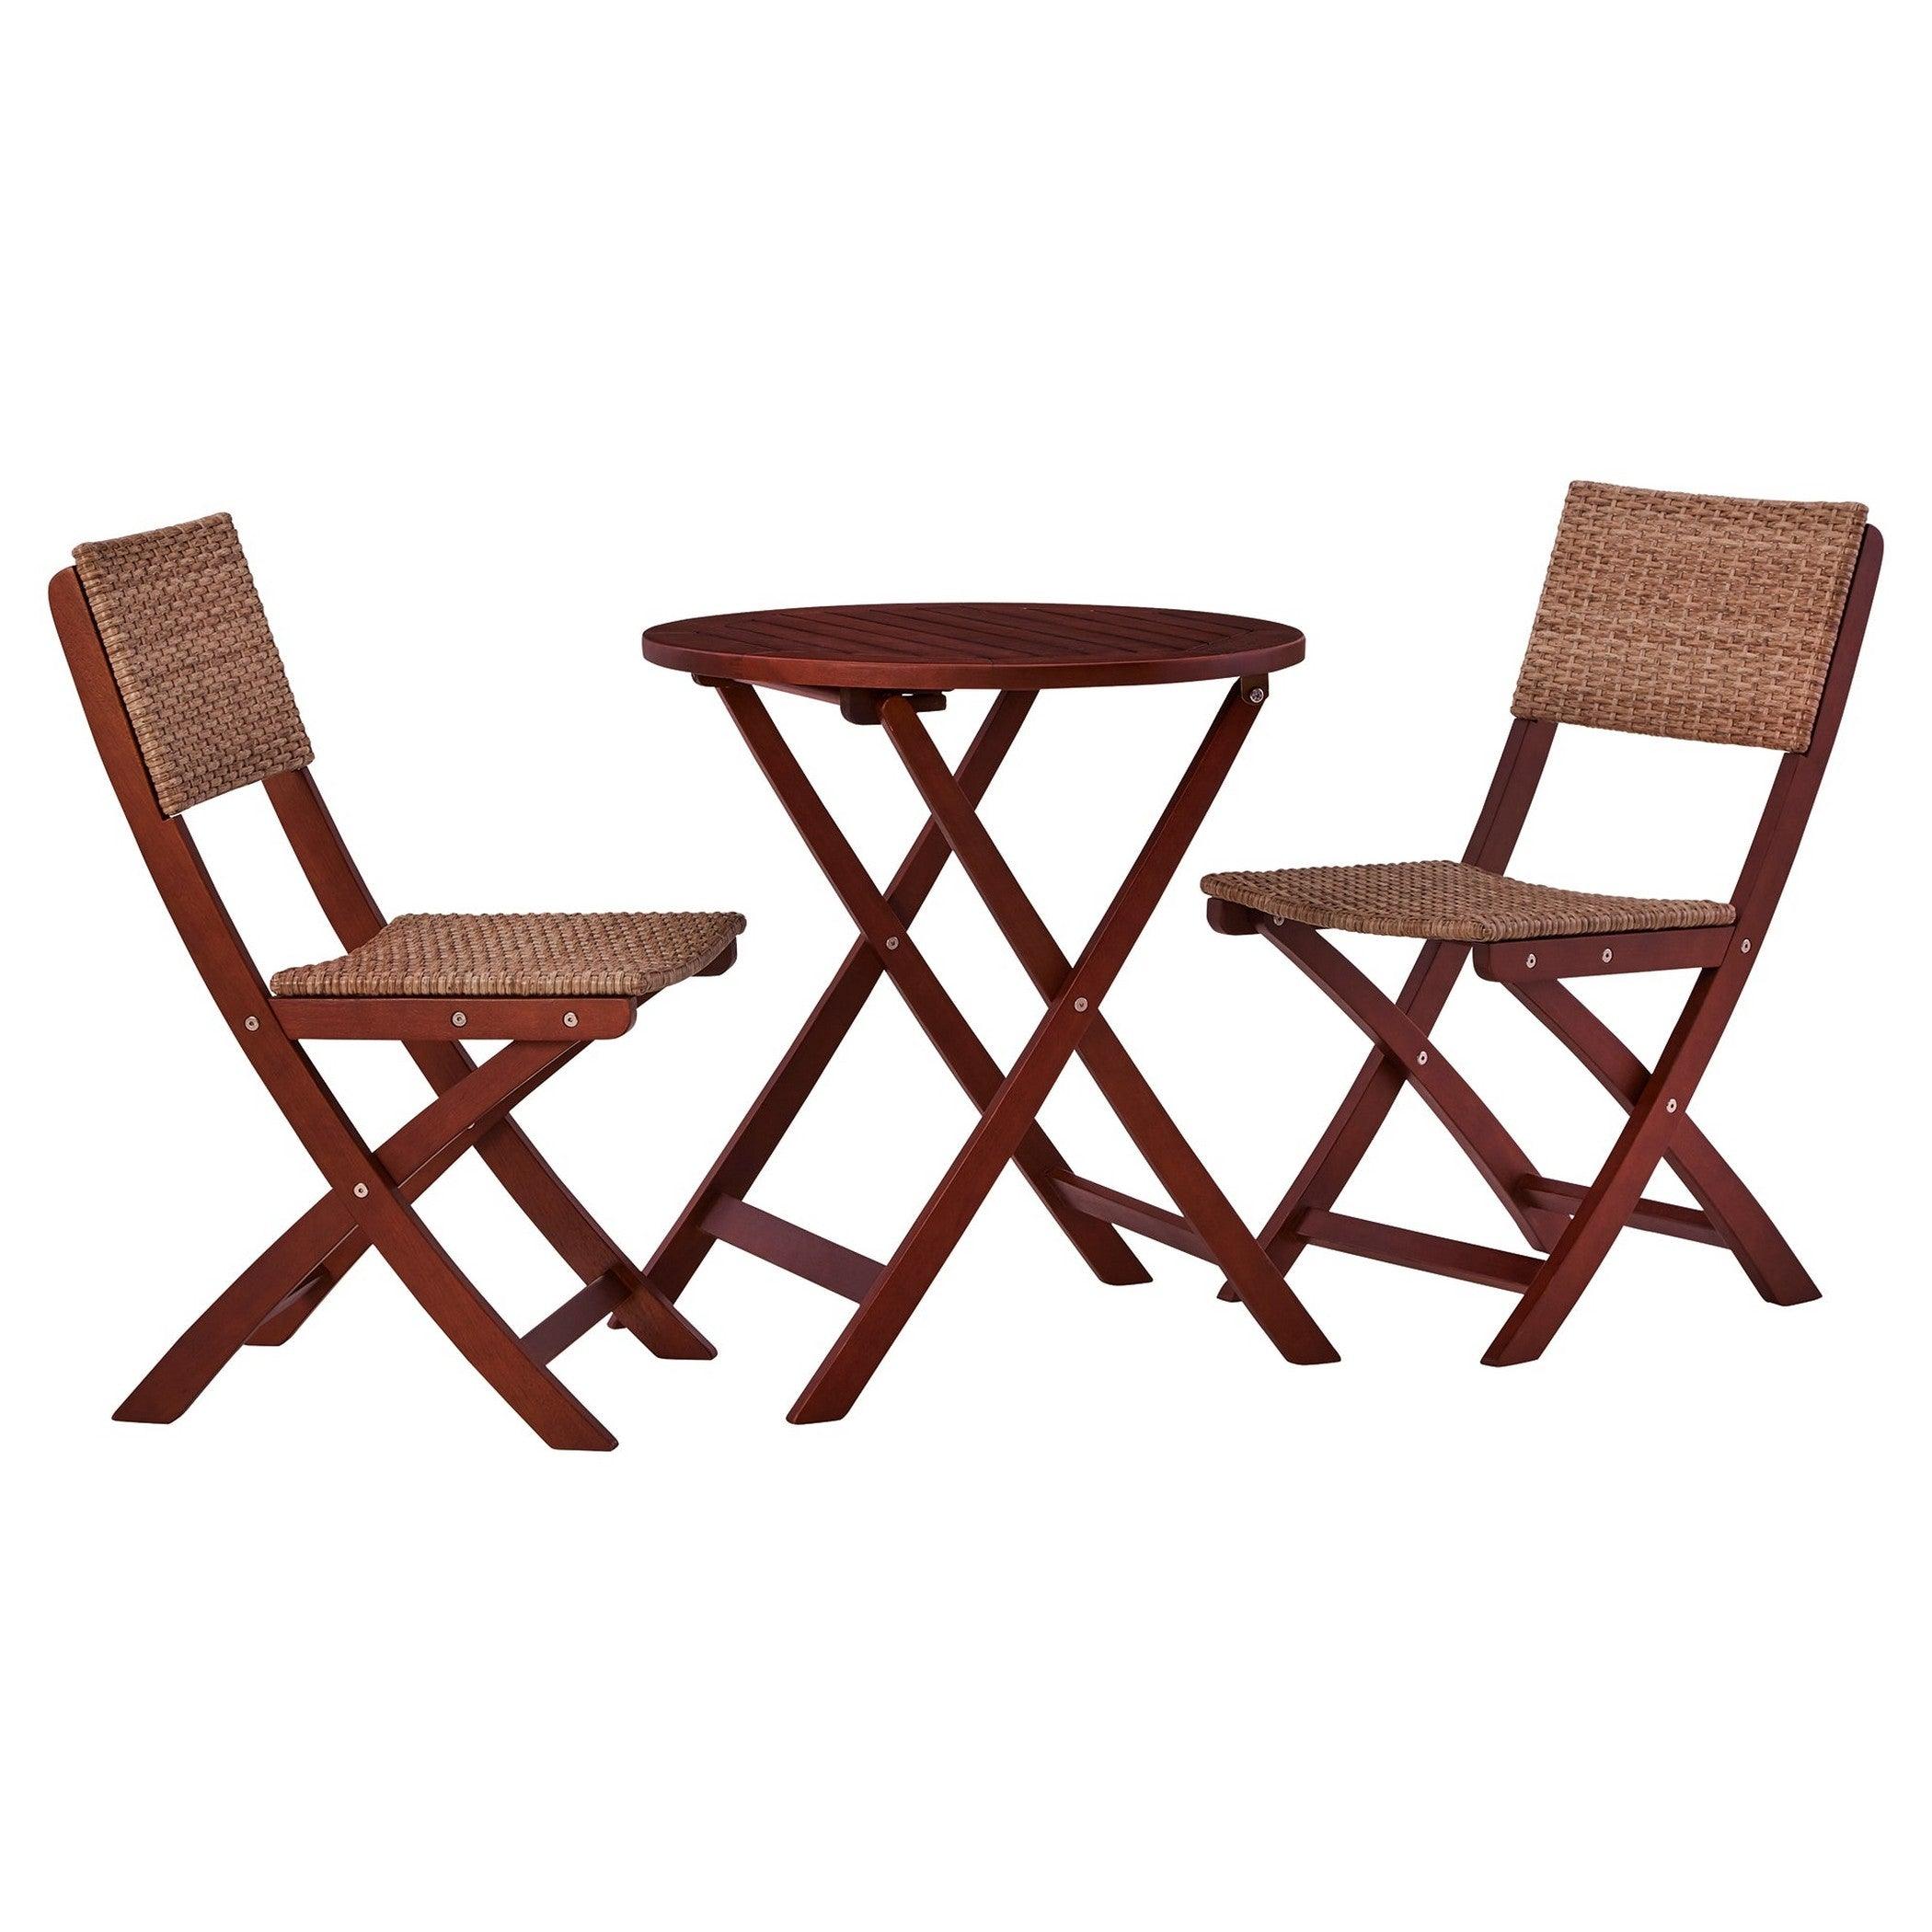 Safari Peak Outdoor Table and Chairs (Set of 3) Ash-P201-049